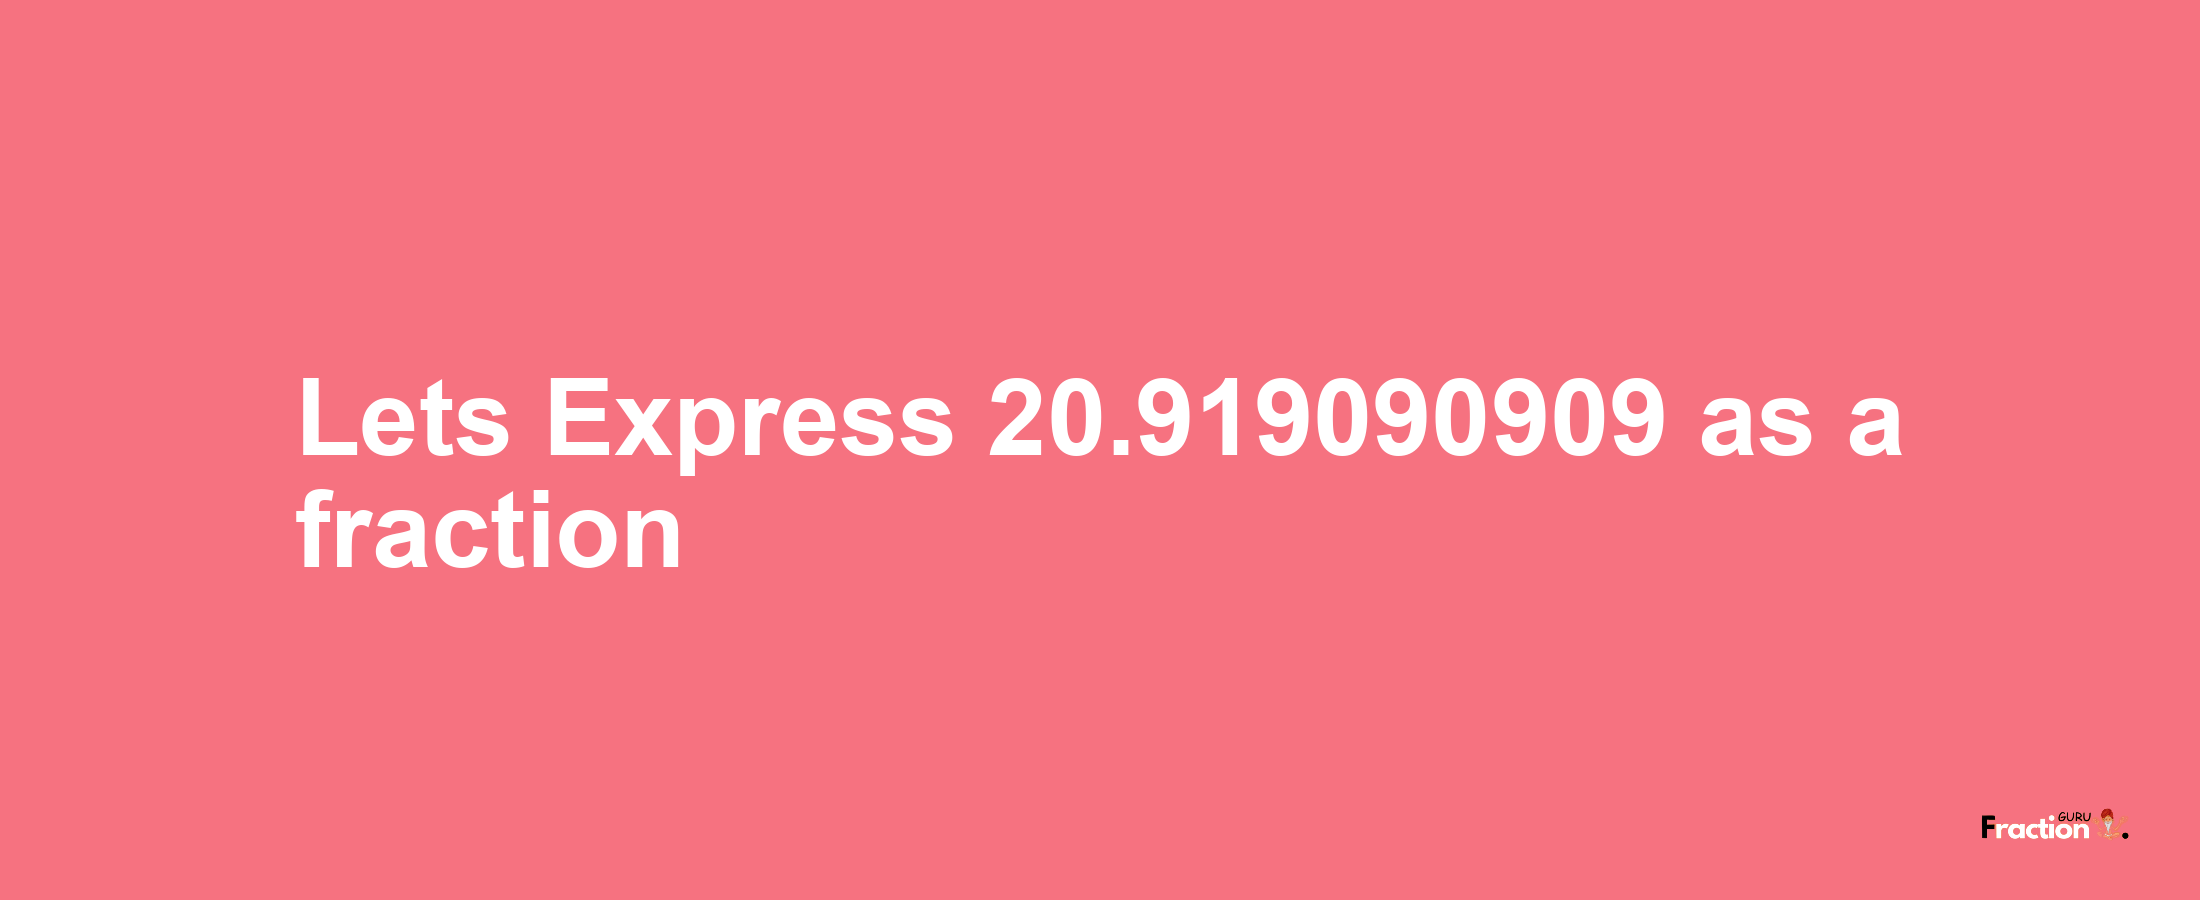 Lets Express 20.919090909 as afraction